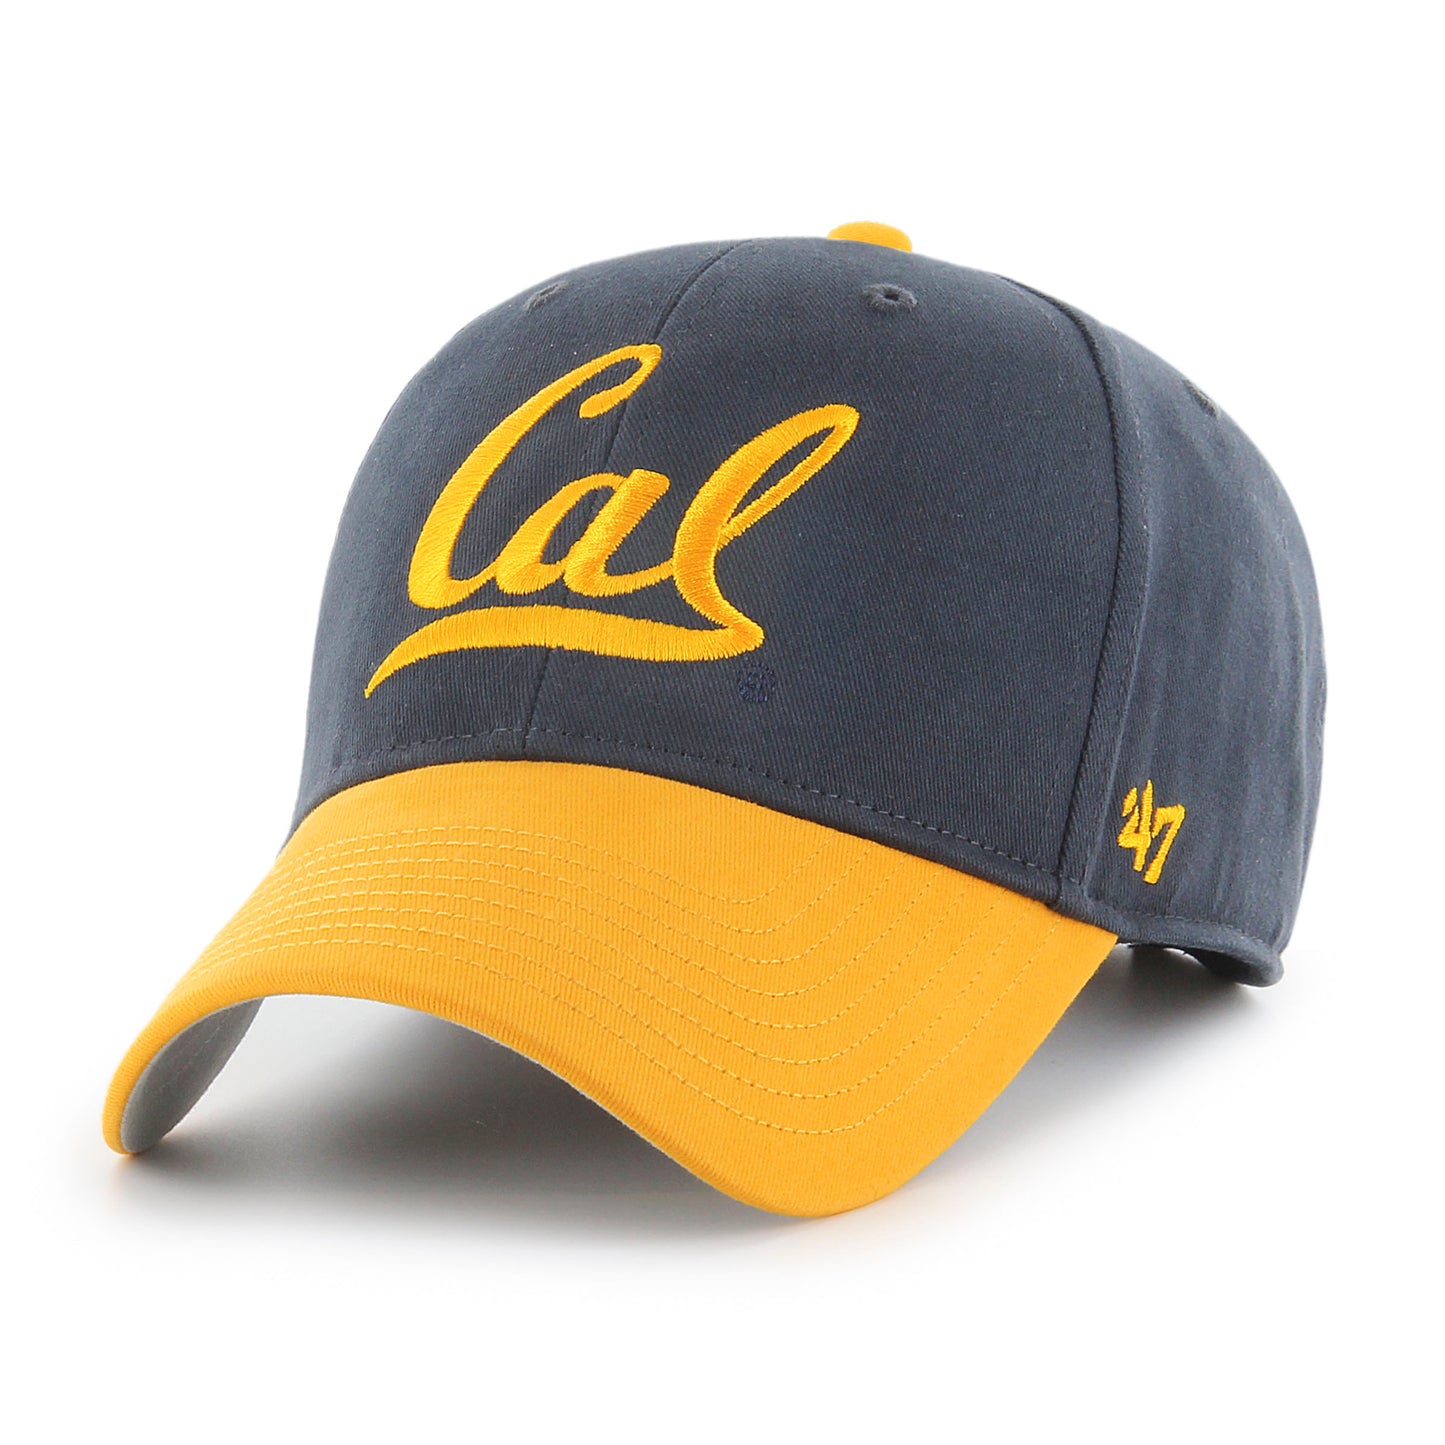 U.C. Berkeley Cal embroidered two tone MVP hat-Navy-Shop College Wear